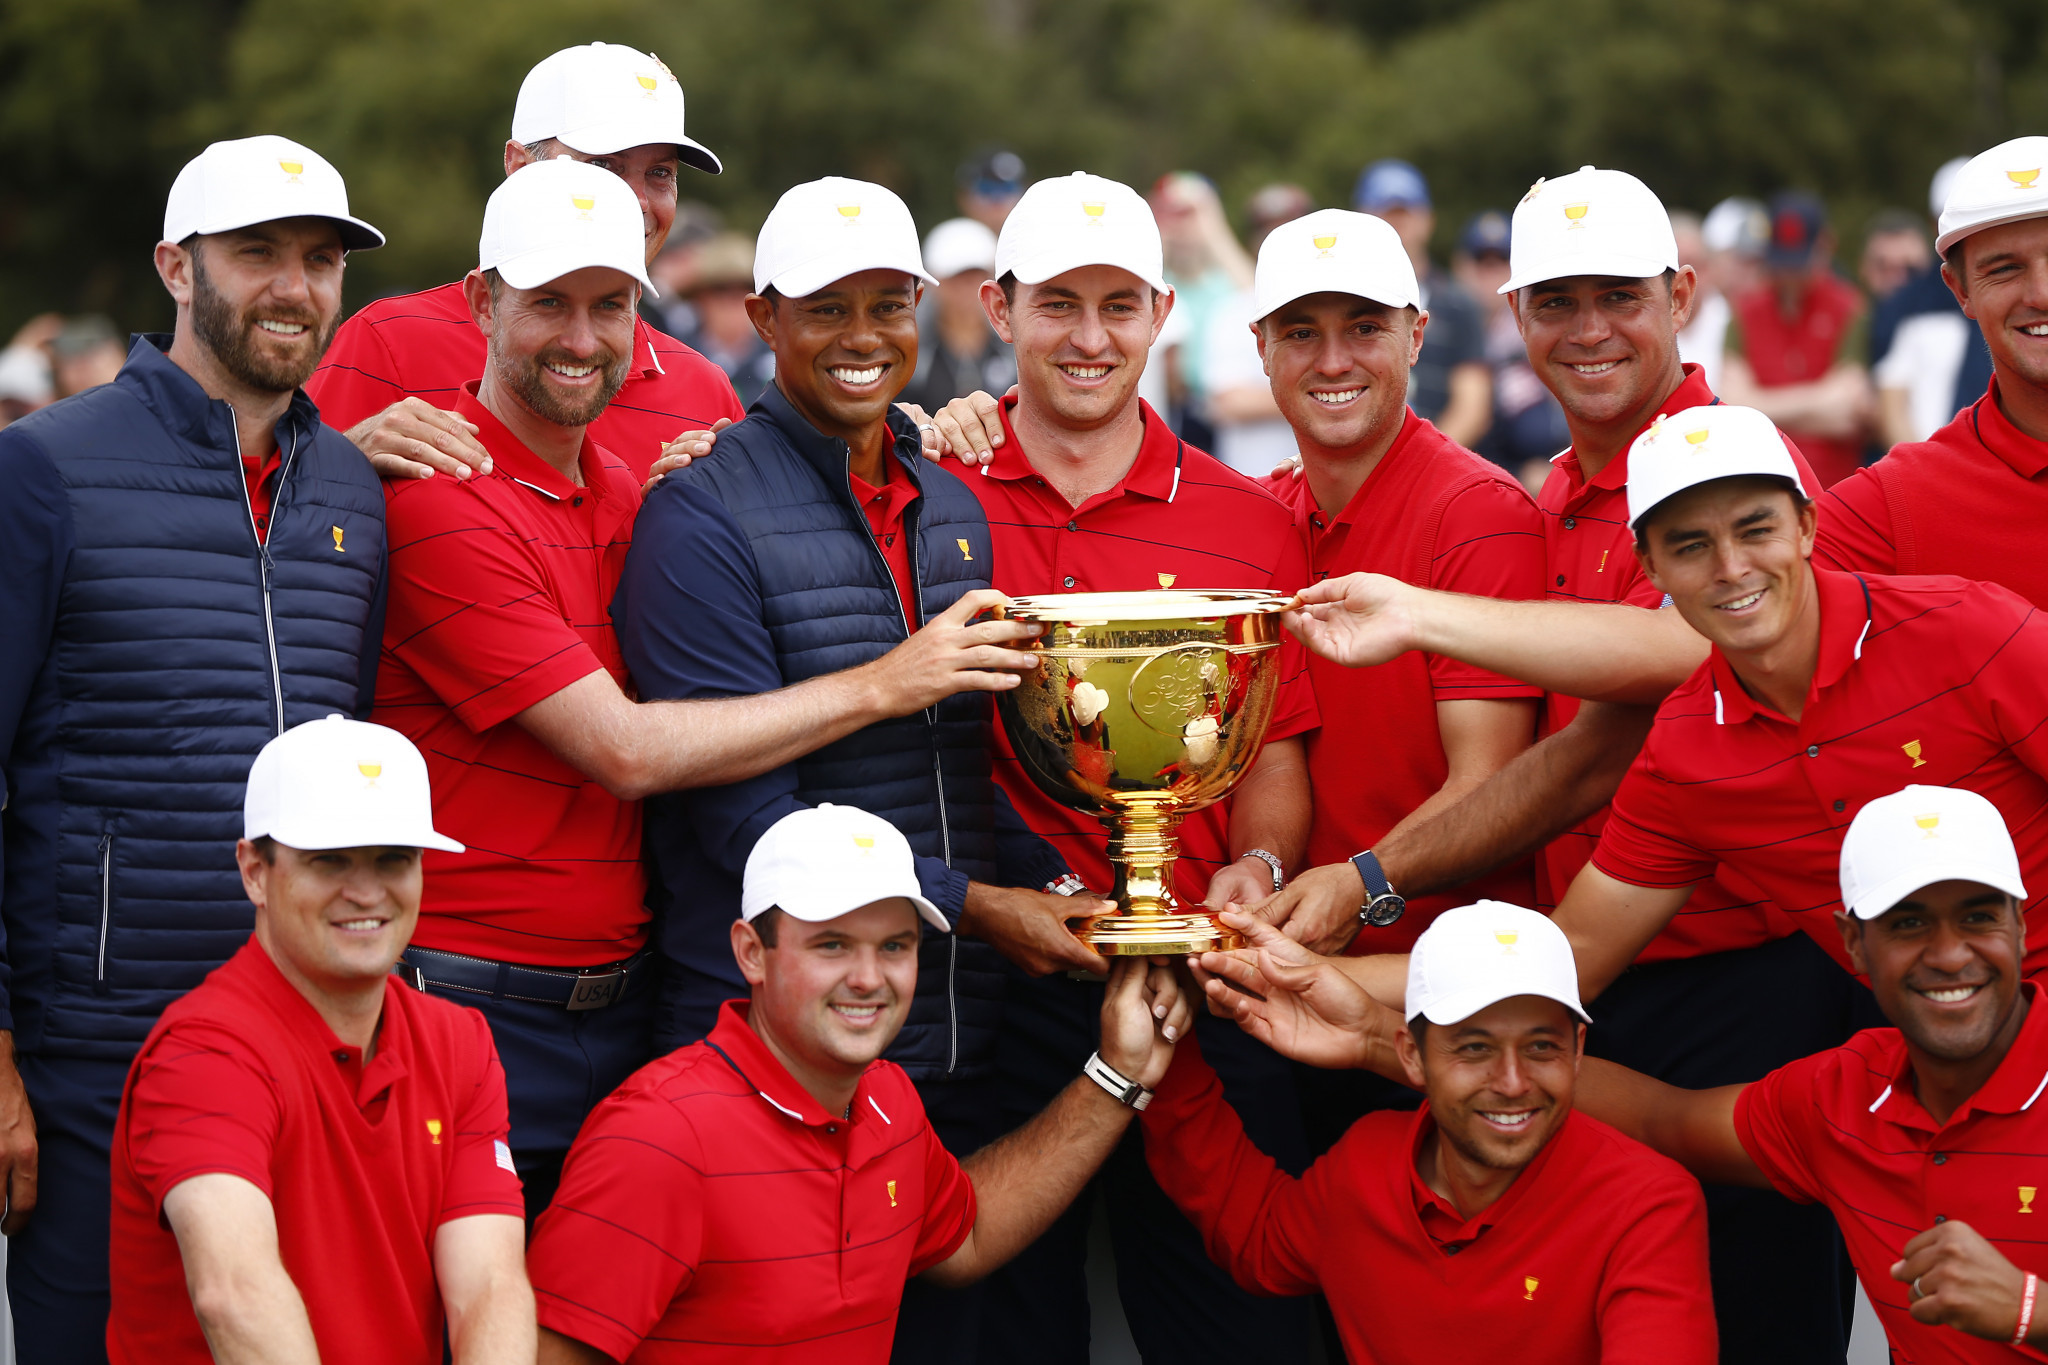 The United States have won eight successive Presidents Cups,  including in 2019 in Melbourne, which it has been announced will host the 2028 and 2040 editions of the event  ©Getty Images